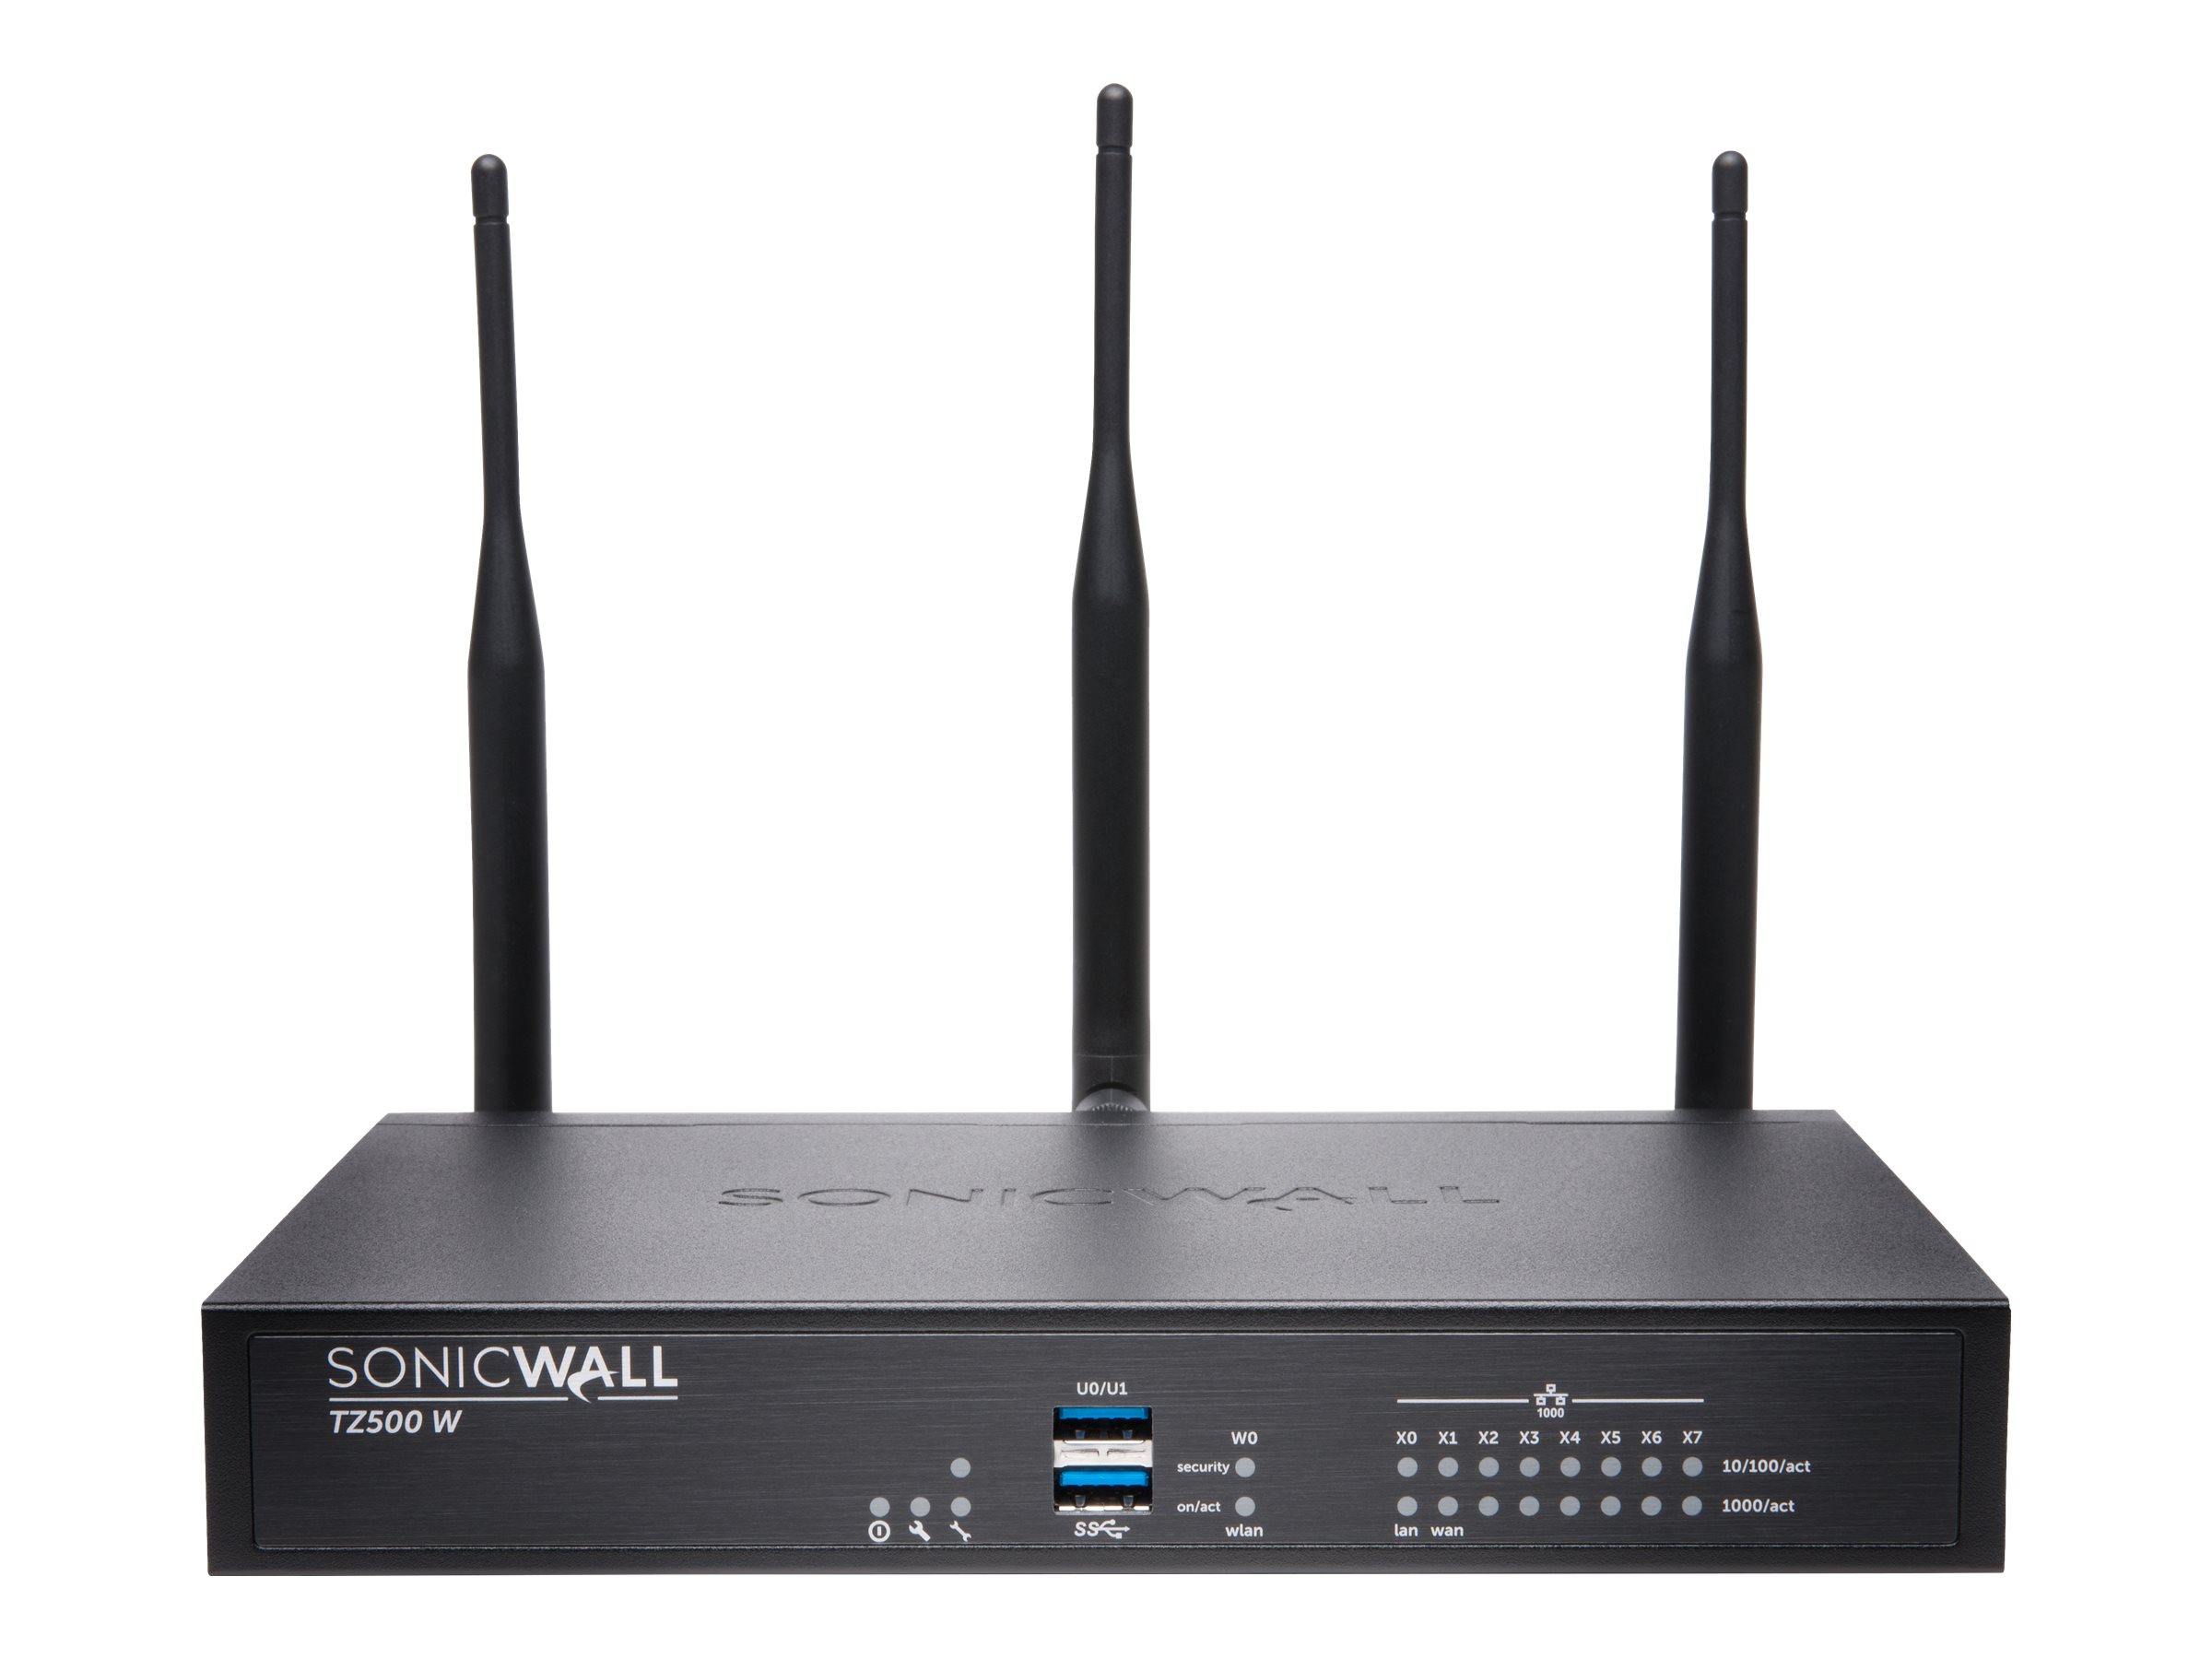 SonicWall TZ500 Wireless-AC - security appliance - image 2 of 4